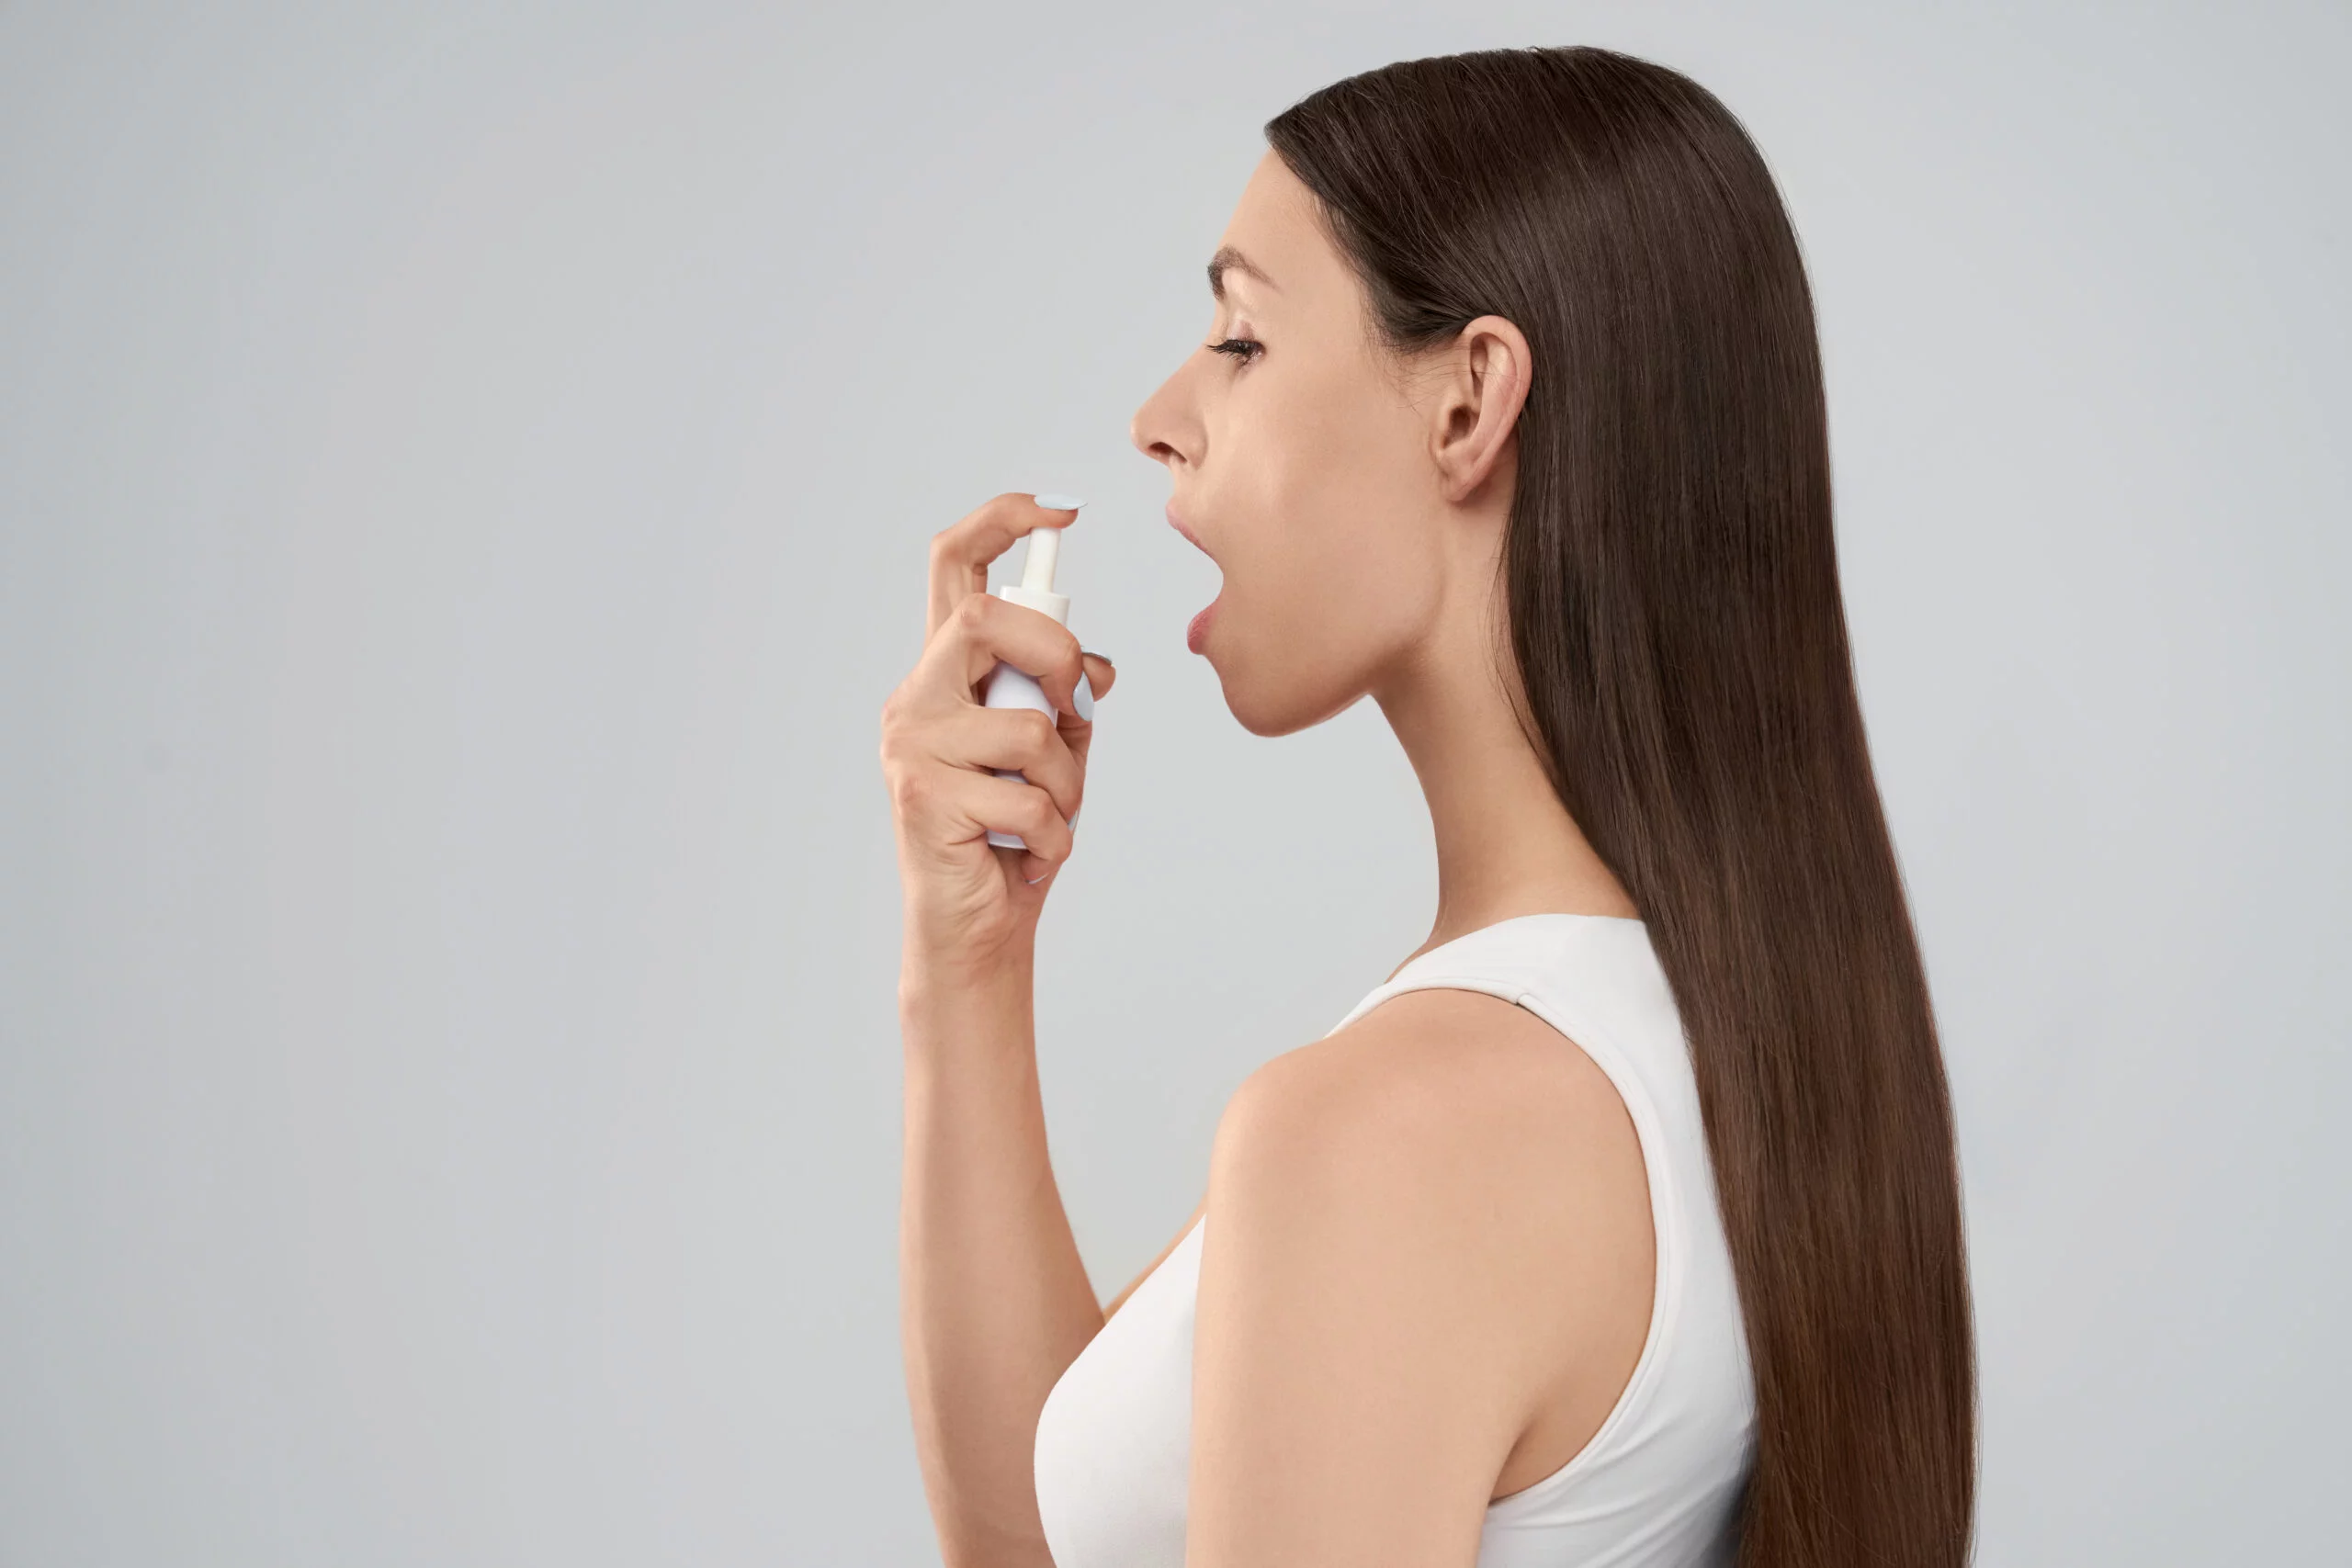 Types of Mouth Spray